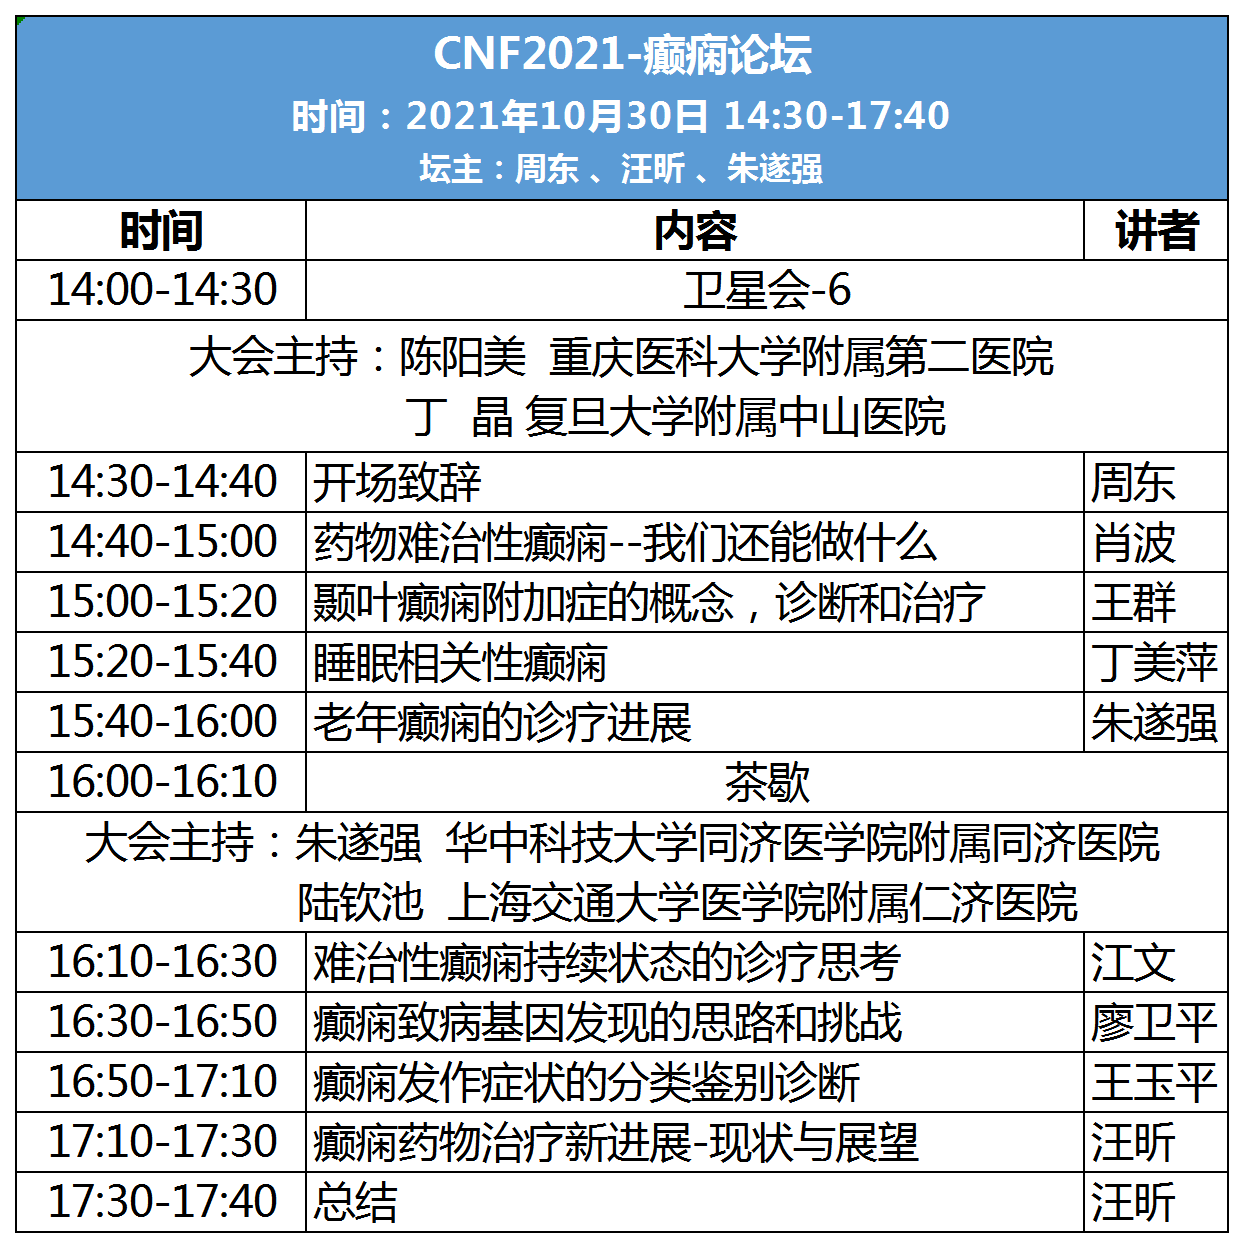 CNF2021-癫痫论坛 .png